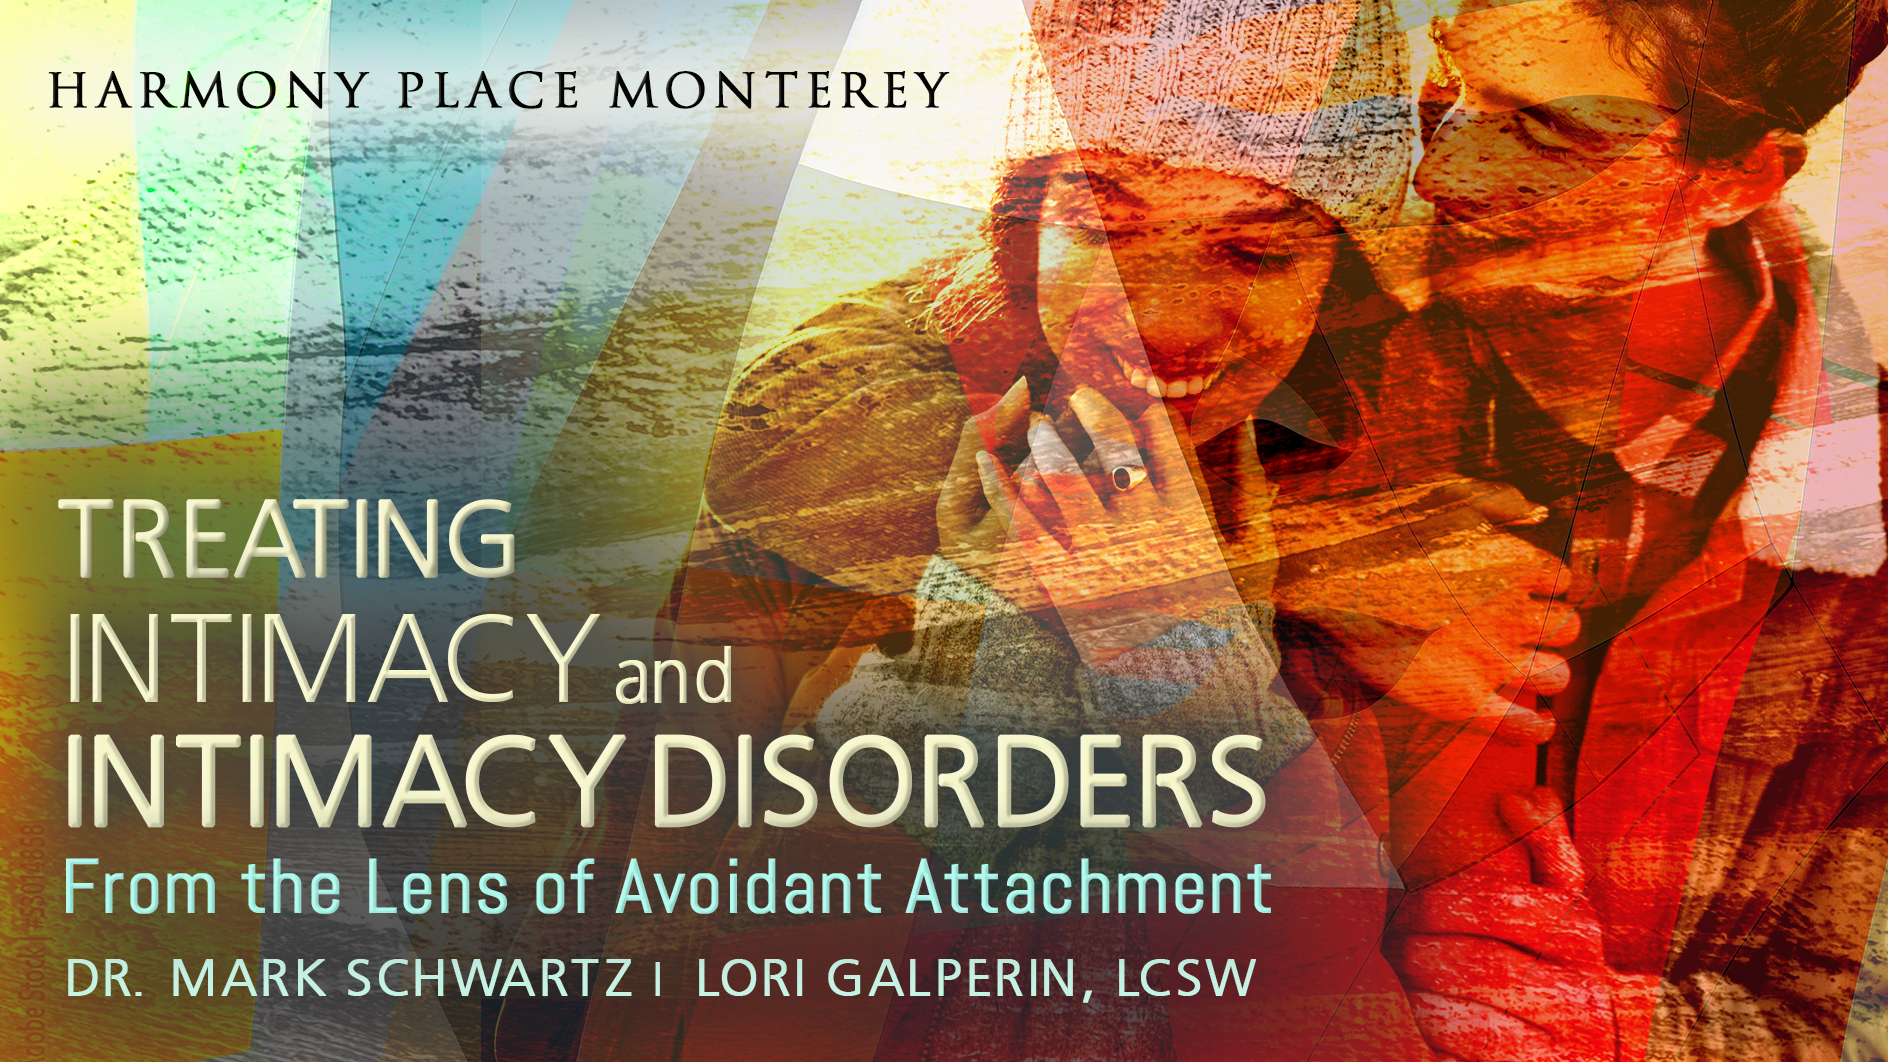 WEBINAR VIDEO: “INTIMACY and INTIMACY DISORDERS” and Avoidant Attachment